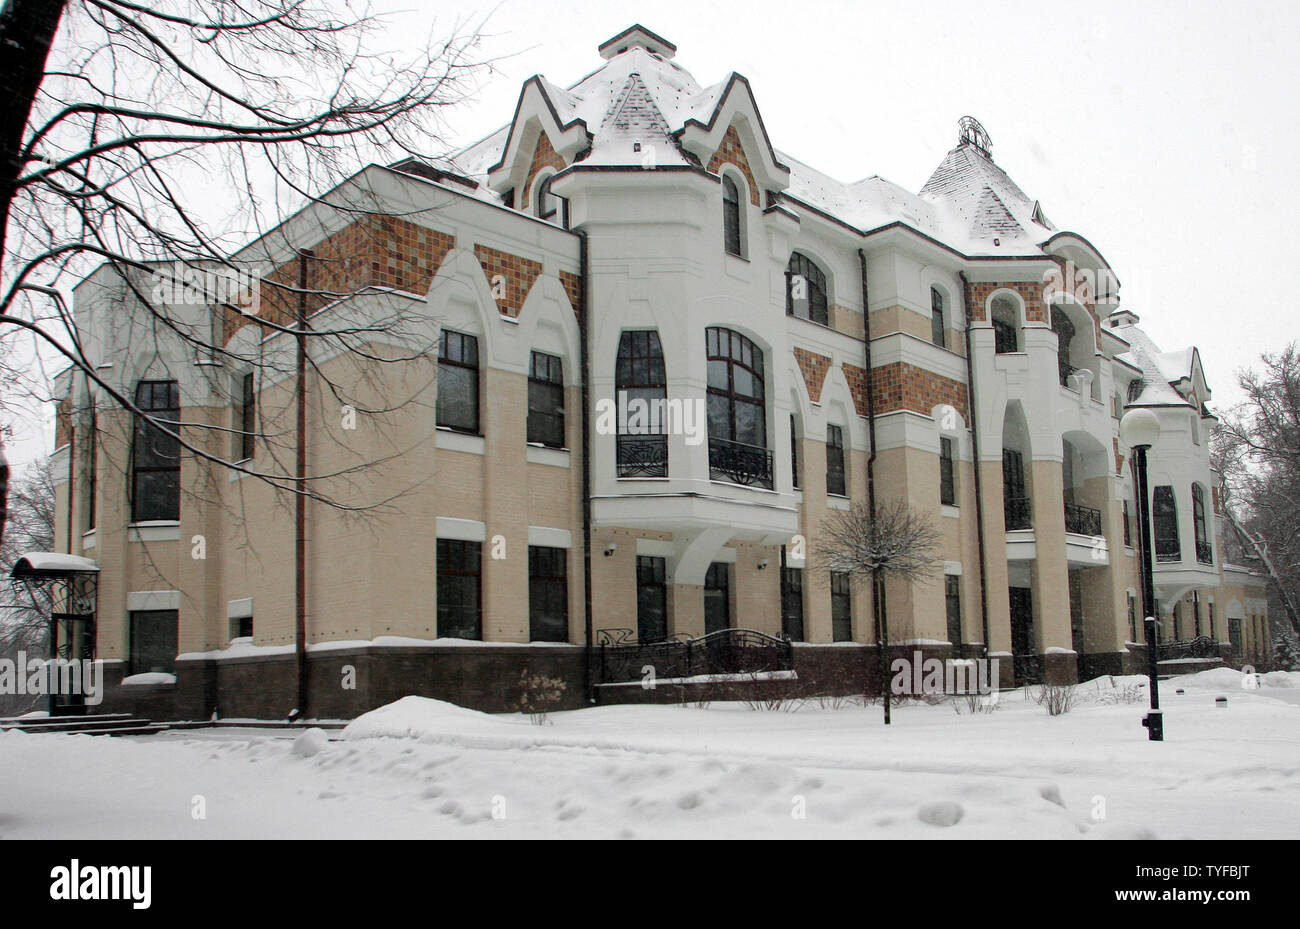 In this file photo, former President Boris Yeltsin's residence in Barvikha, the most presitigious and expensive suburb of Moscow  on January 30, 2006. Yeltsin died at the age of 76 on April 23, 2007 in Moscow. Yeltsin pushed Russia to democracy and a market economy after helping in the collapse of the Soviet Union communist state in 1991.  (UPI Photo/Anatoli Zhdanov) Stock Photo